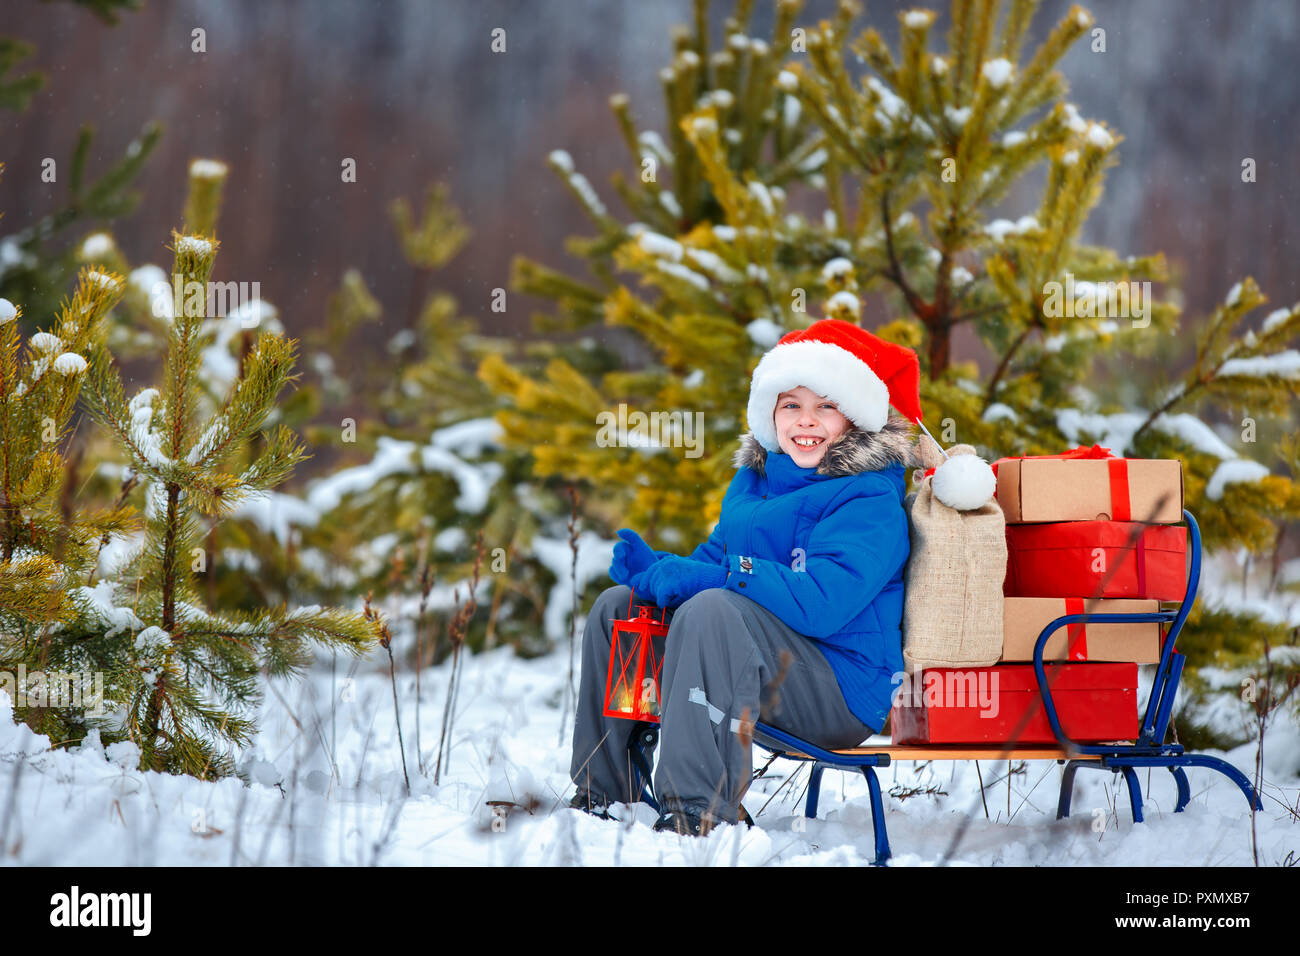 Cute little boy in Santa hat carries a wooden sled with gifts in snowy forest Stock Photo